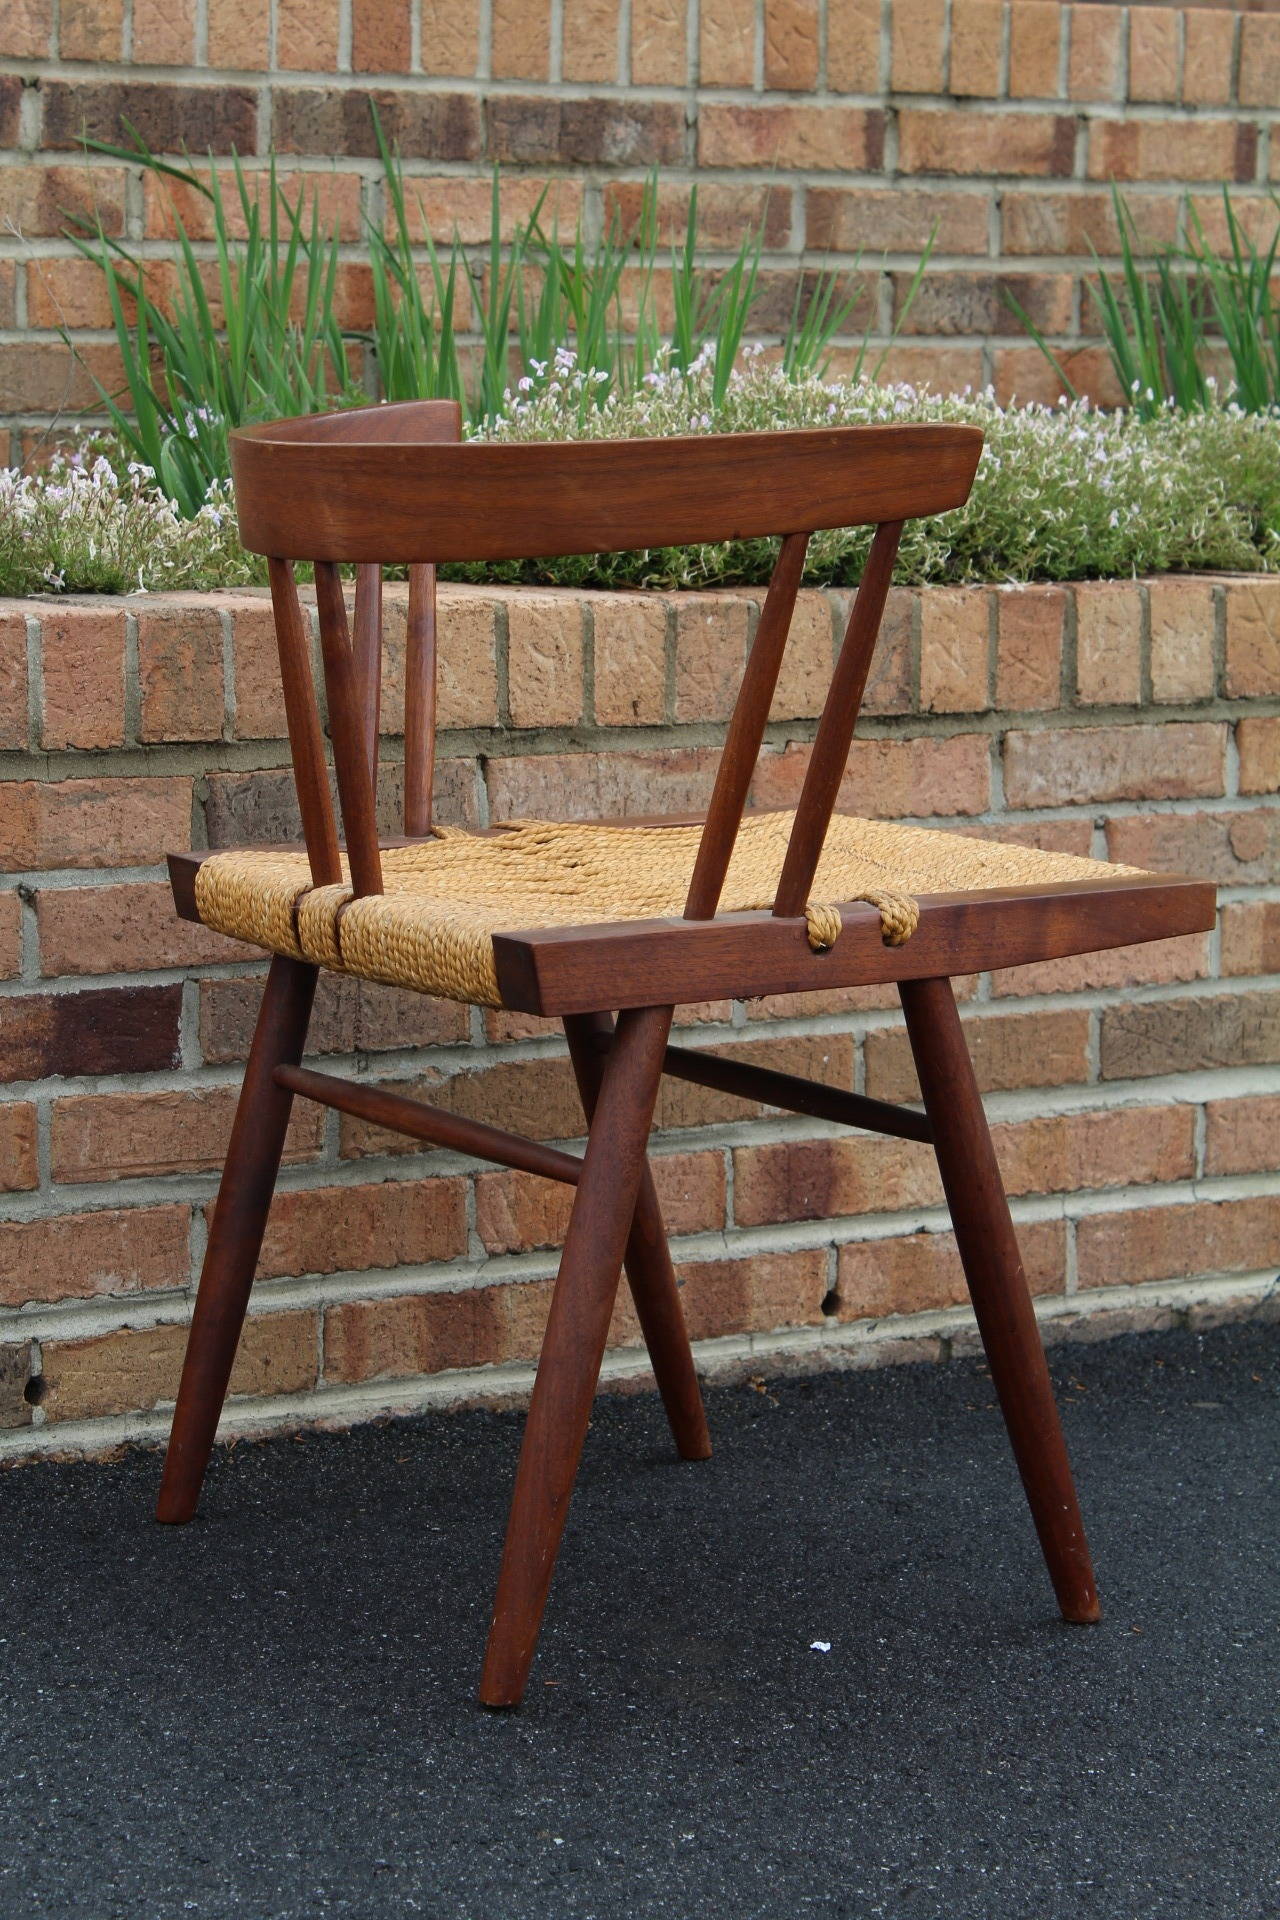 20th Century Grass-Seated Chair by George Nakashima